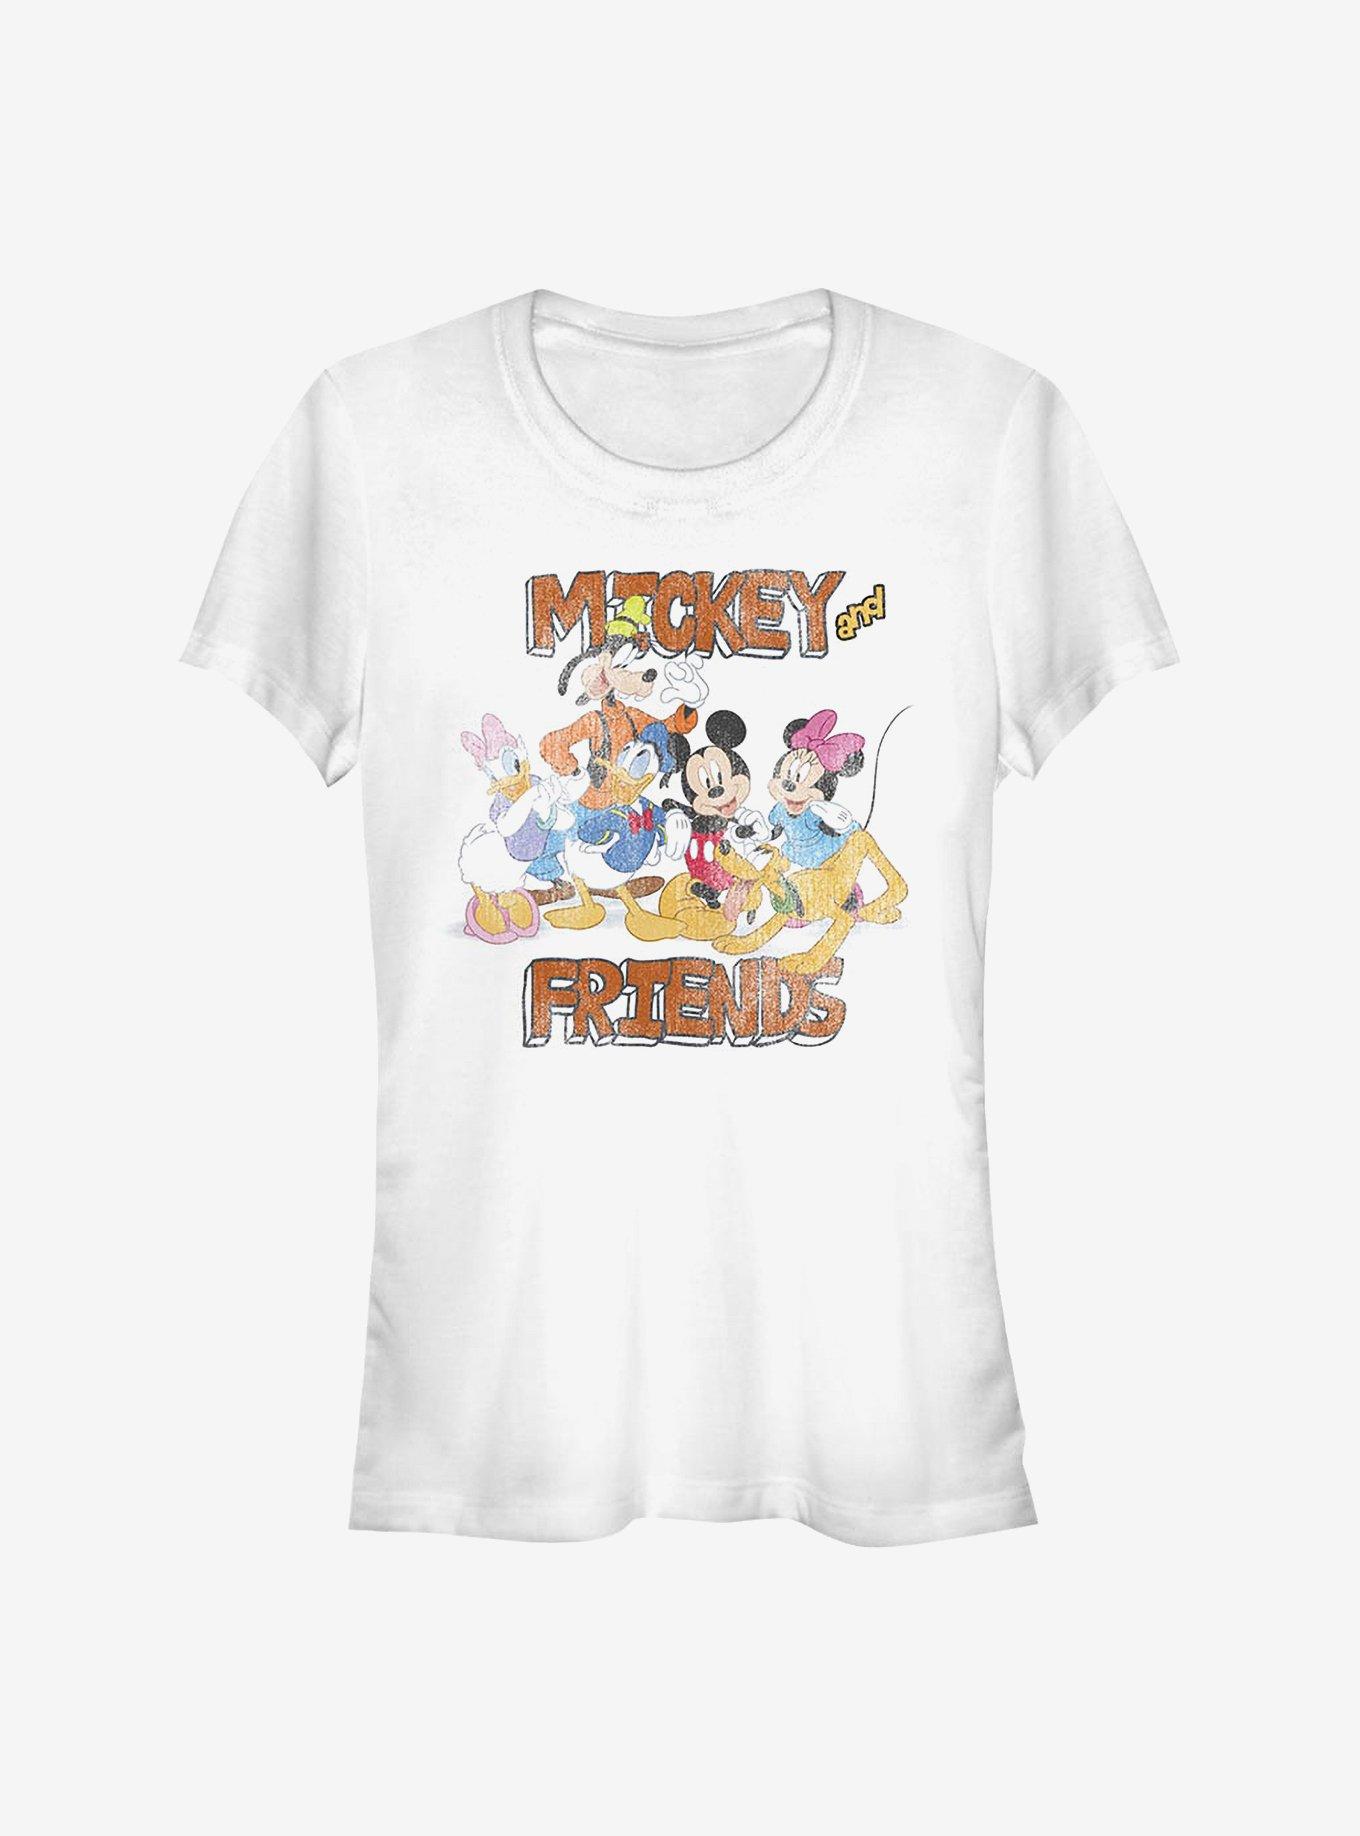 Disney Mickey Mouse Mickey And Friends Girls T-Shirt, WHITE, hi-res